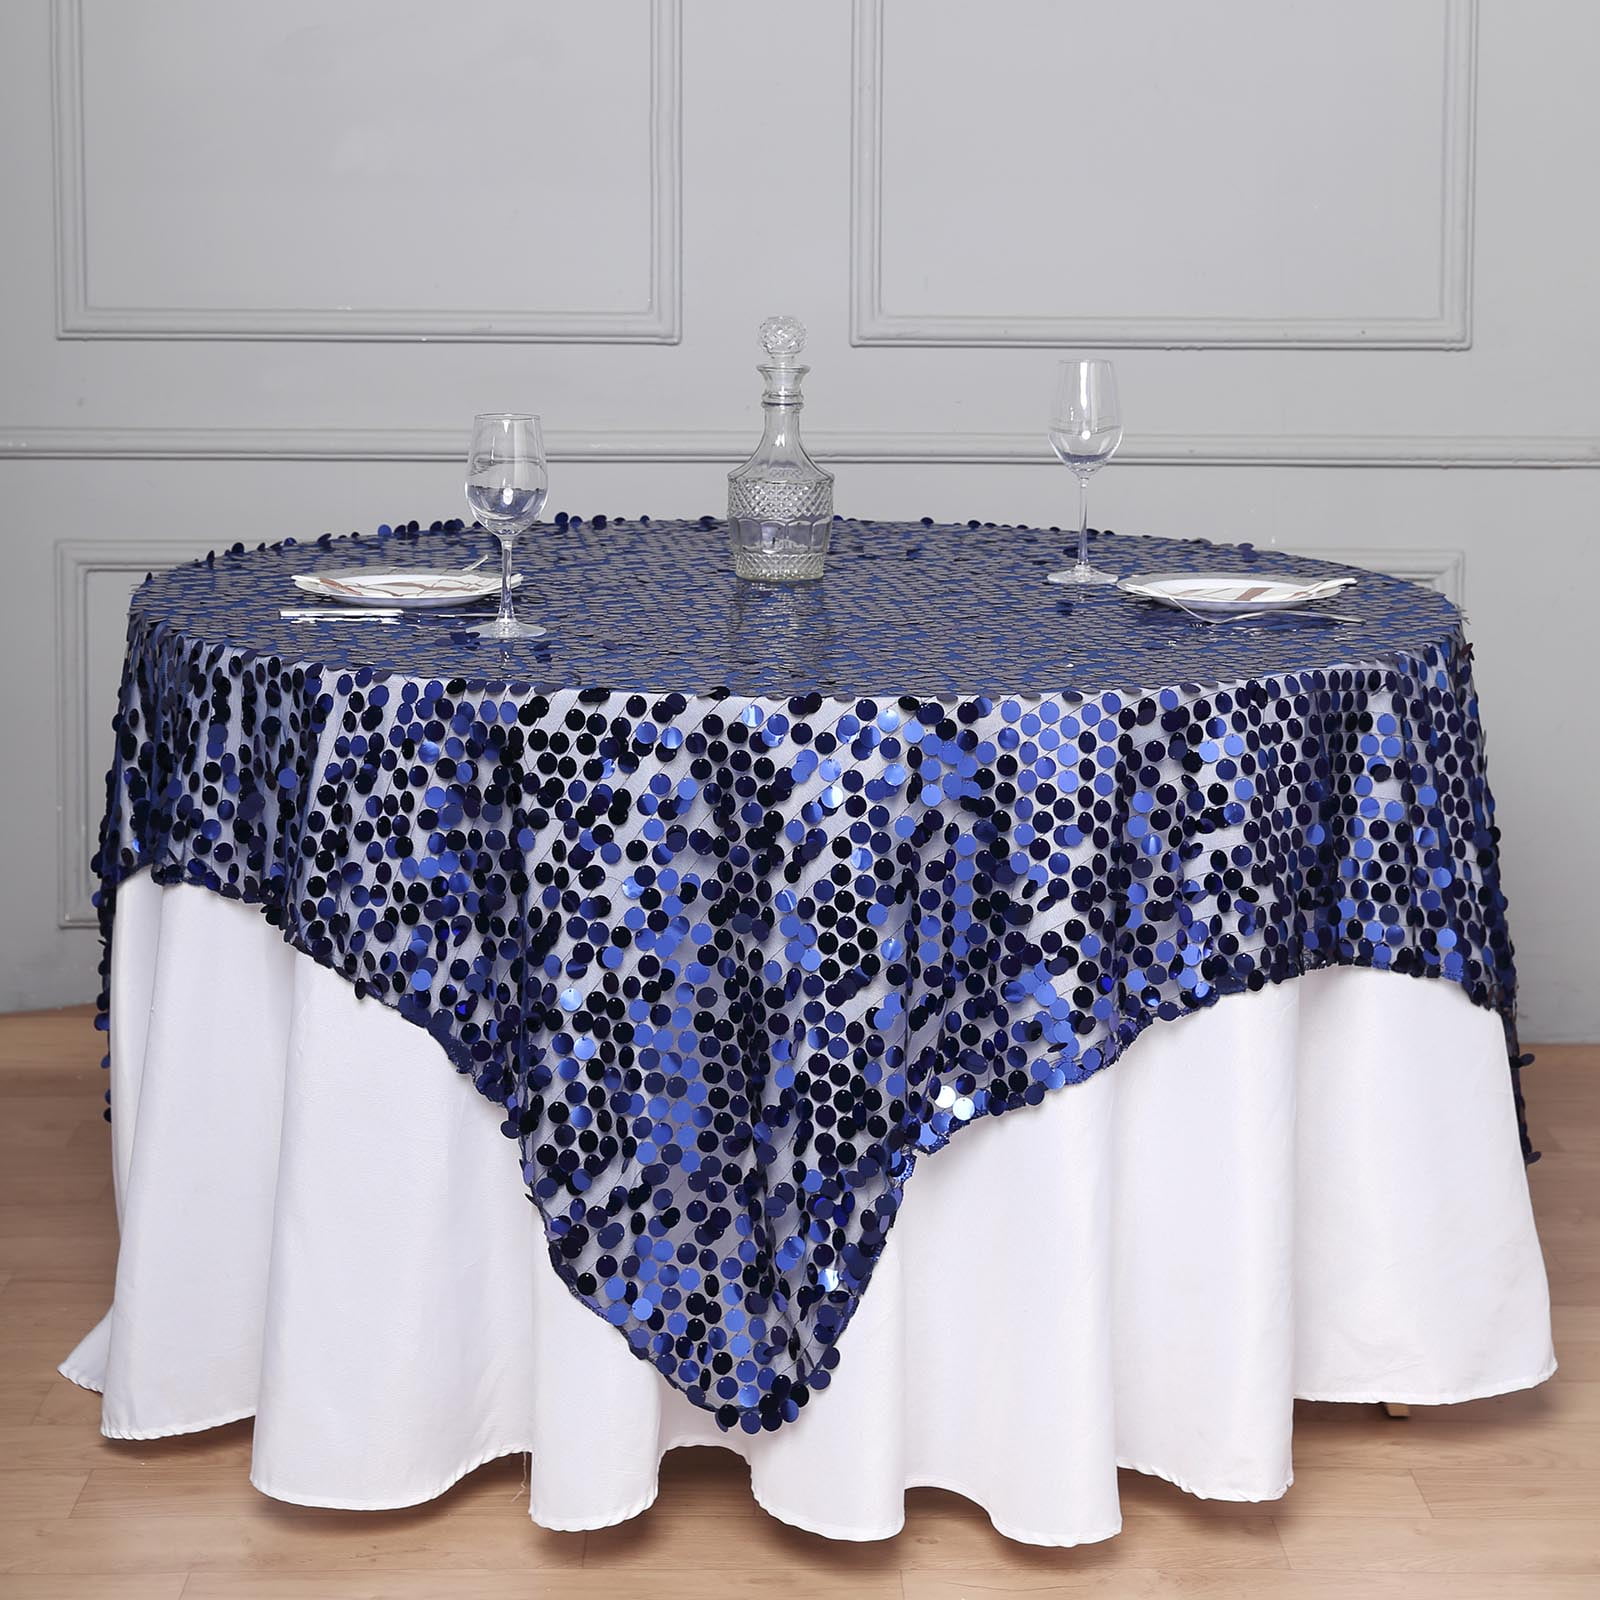 BalsaCircle 72 x 72 Navy Blue Square Big Payette Sequin Table Overlay  Linens Tablecloth Kitchen 